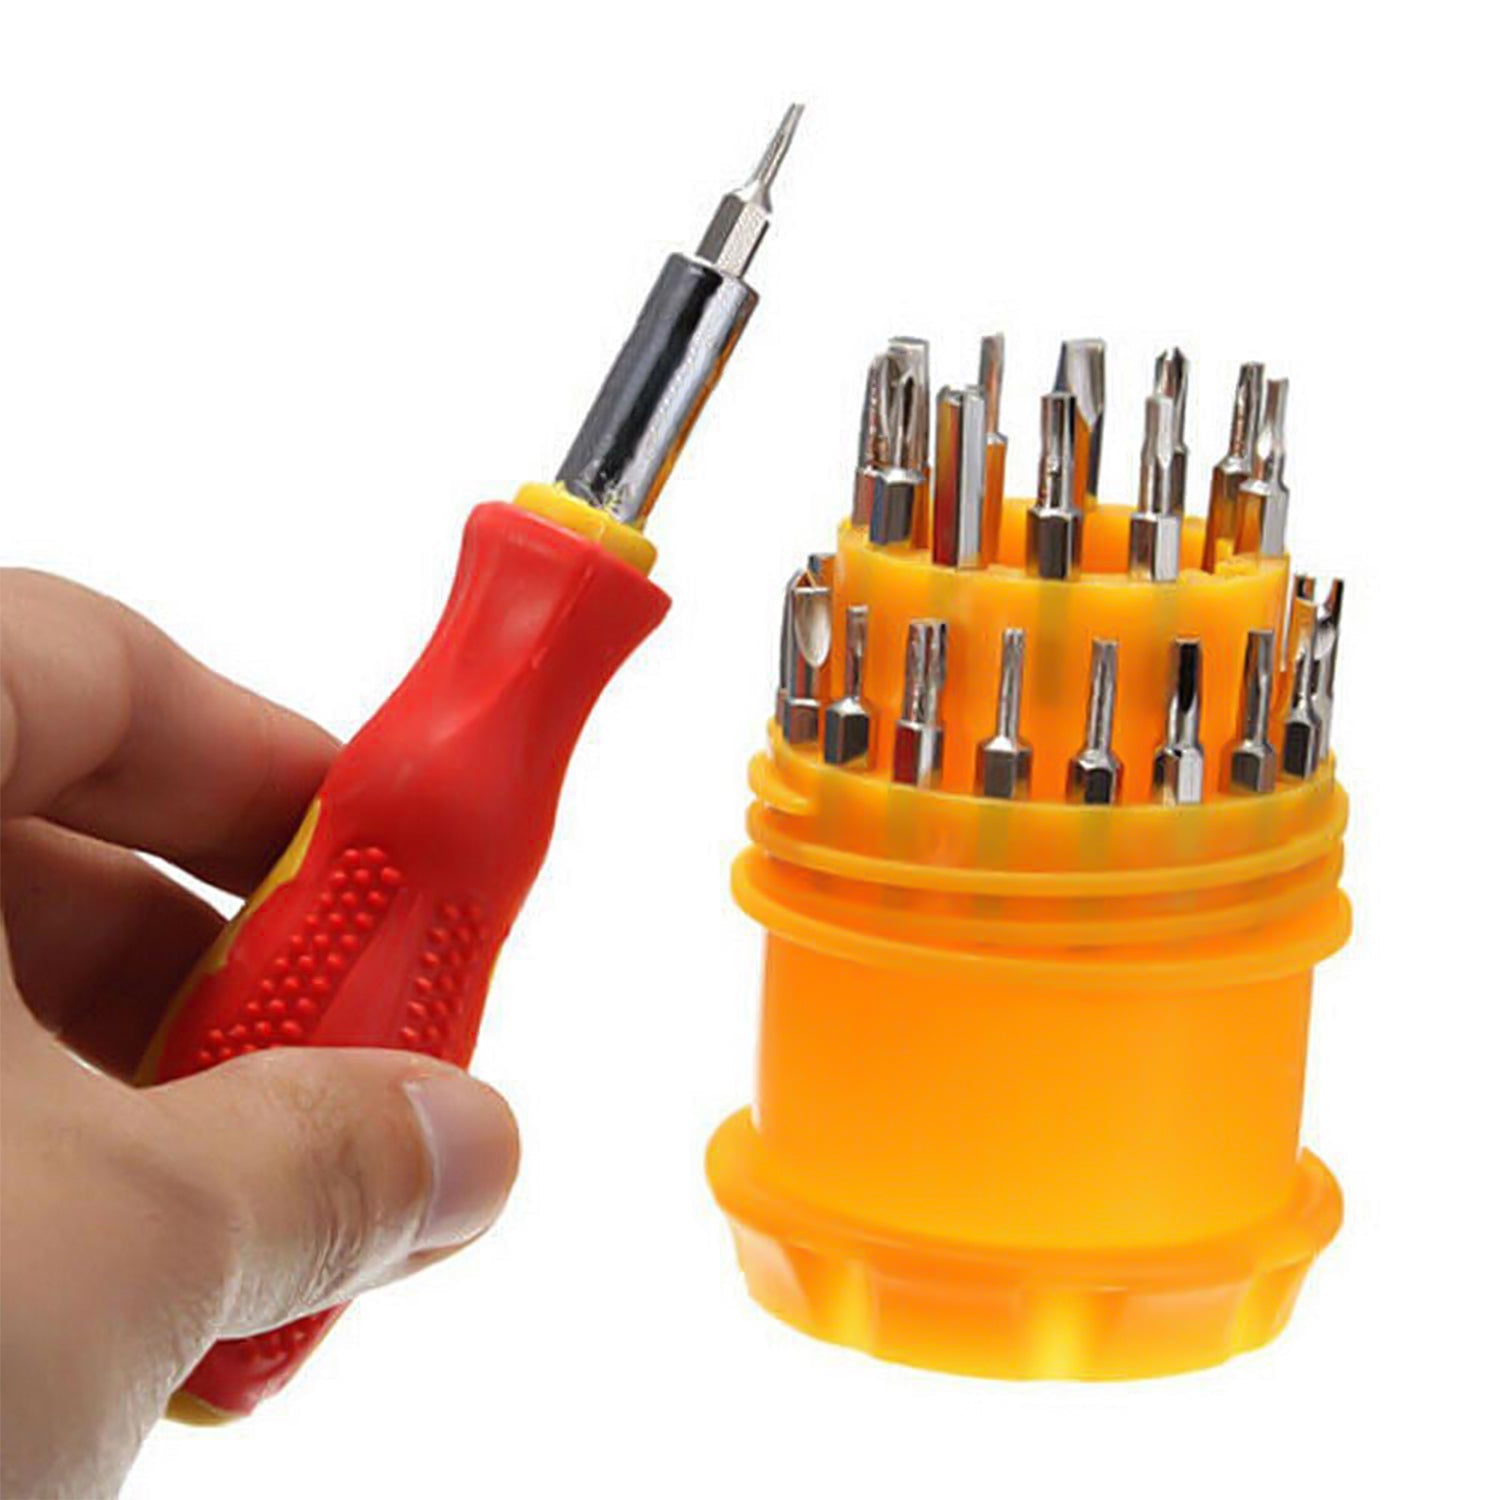 9110 (SET OF 4PC) SCREWDRIVER SET, STEEL 31 IN 1 WITH 30 SCREWDRIVER BITS, PROFESSIONAL MAGNETIC DRIVER SET DeoDap